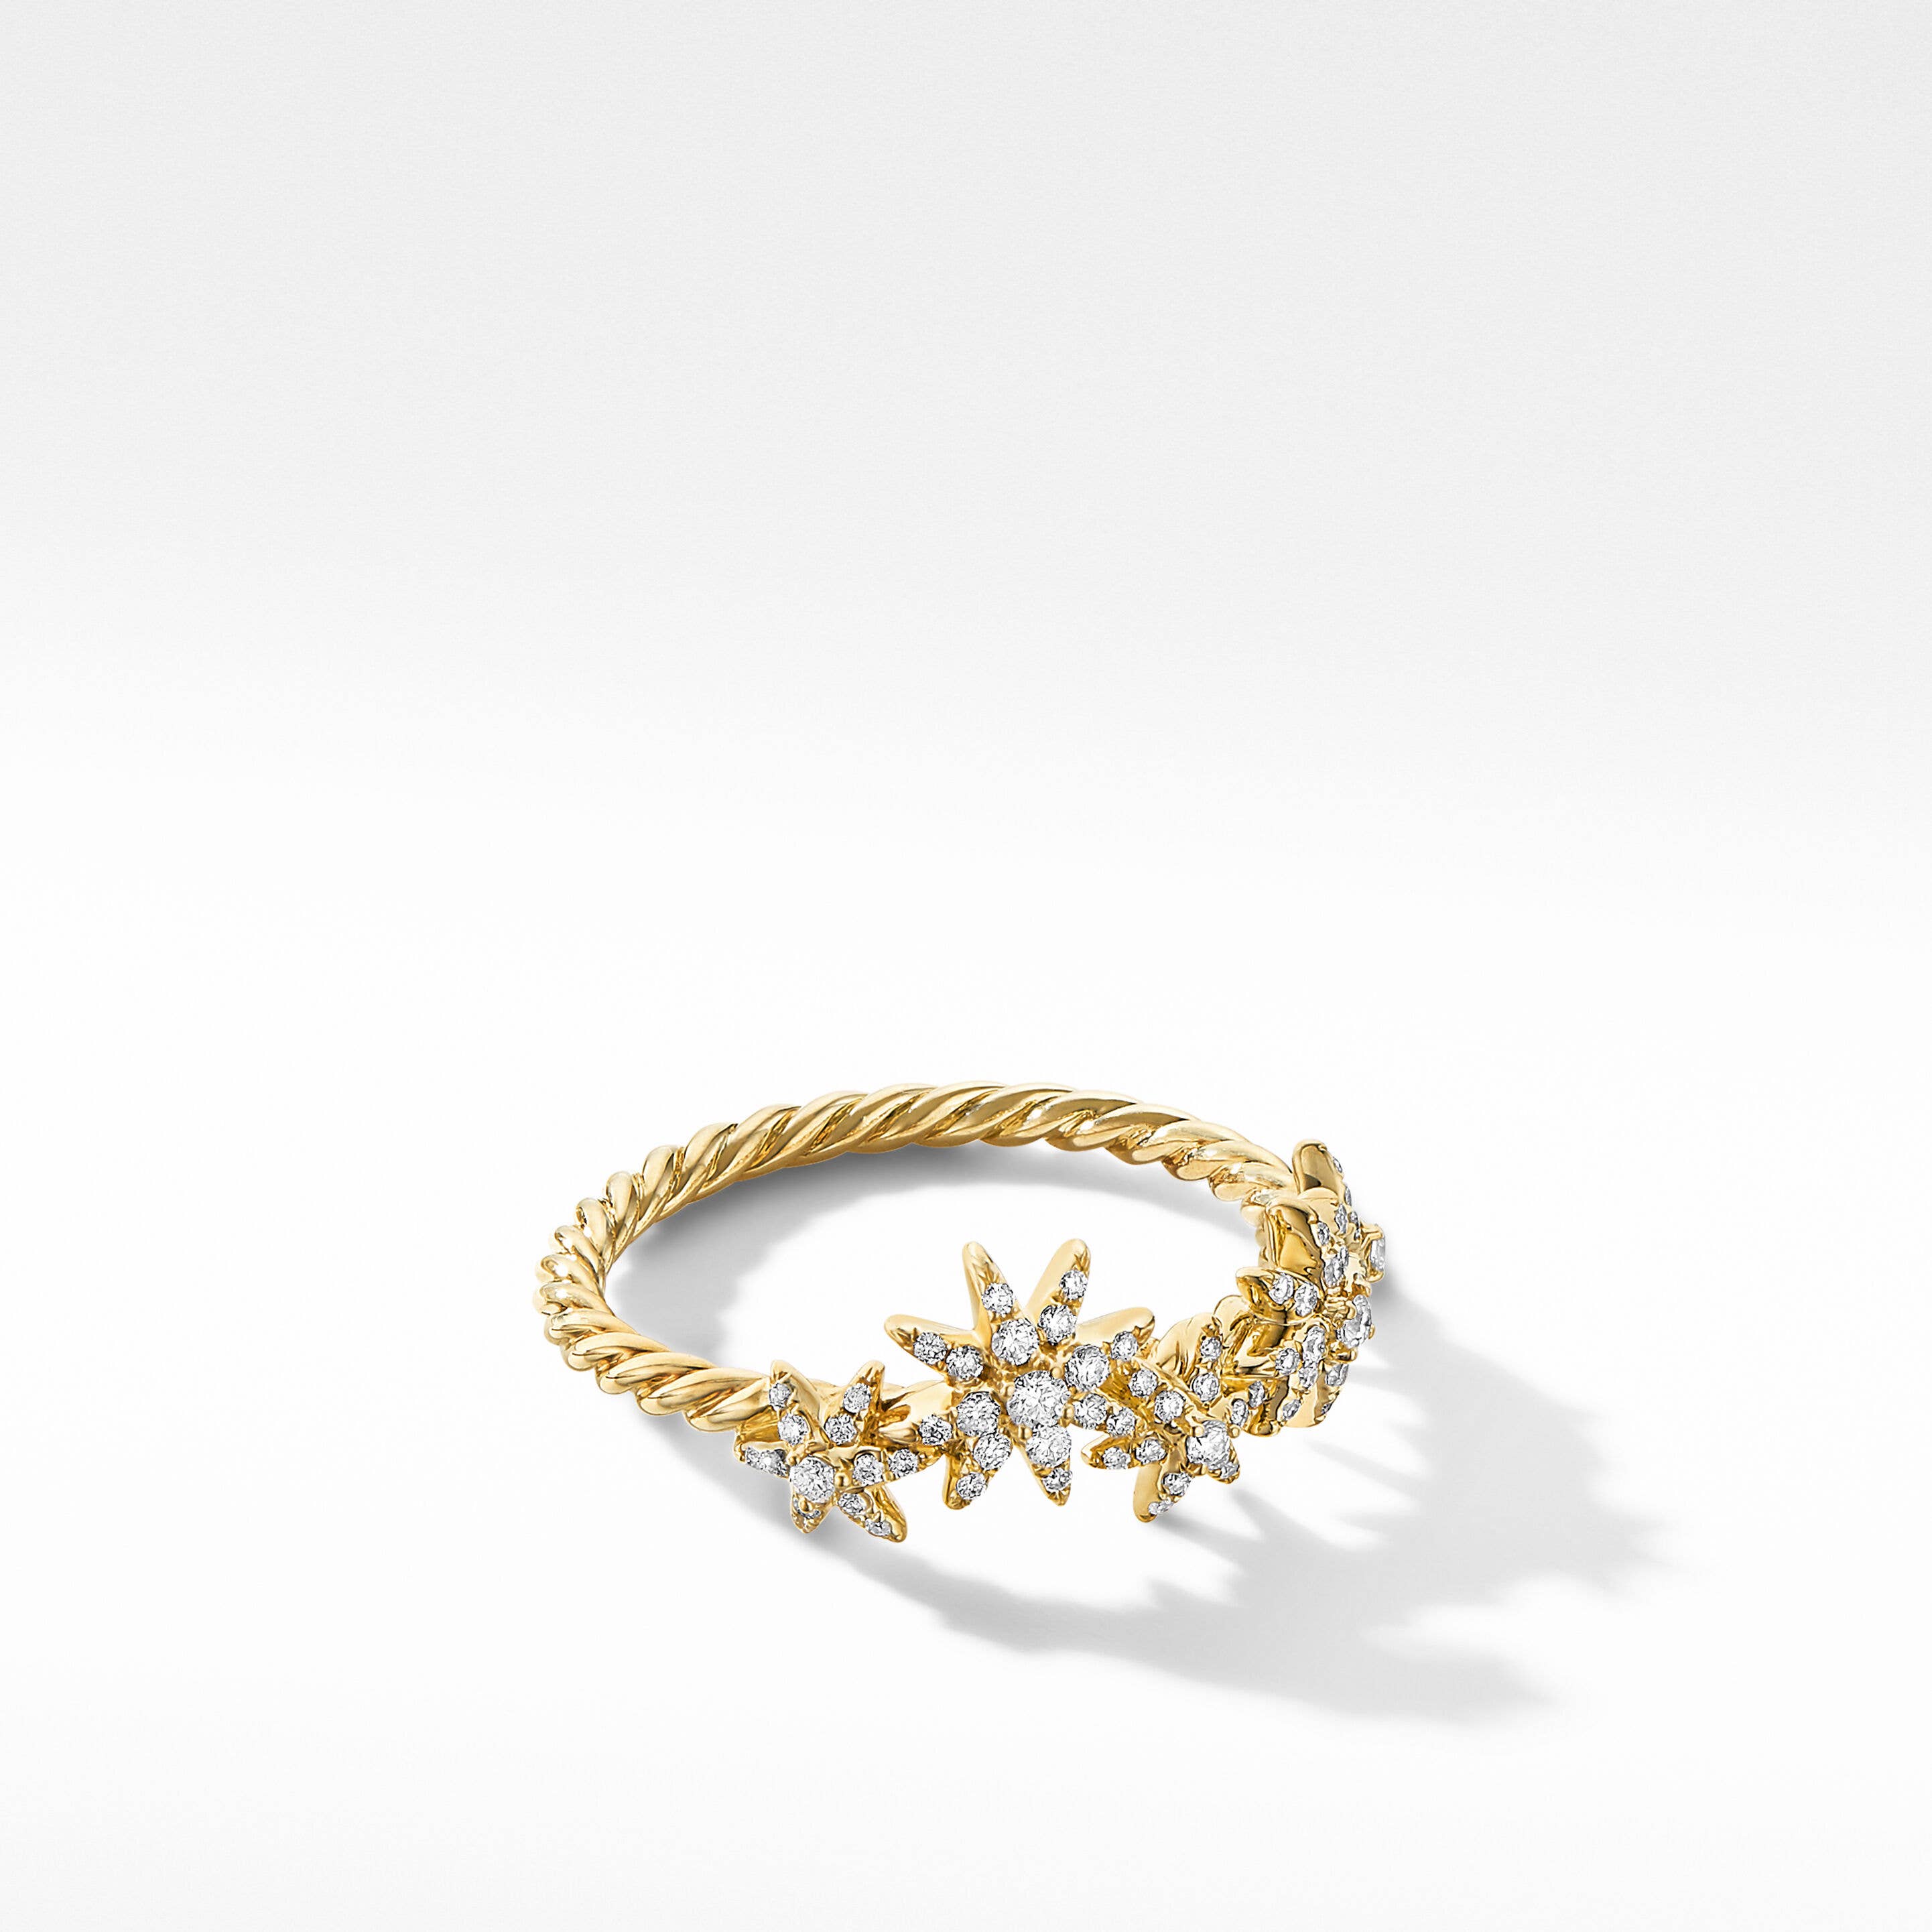 Starburst Cluster Band Ring in 18K Yellow Gold with Full Pavé Diamonds